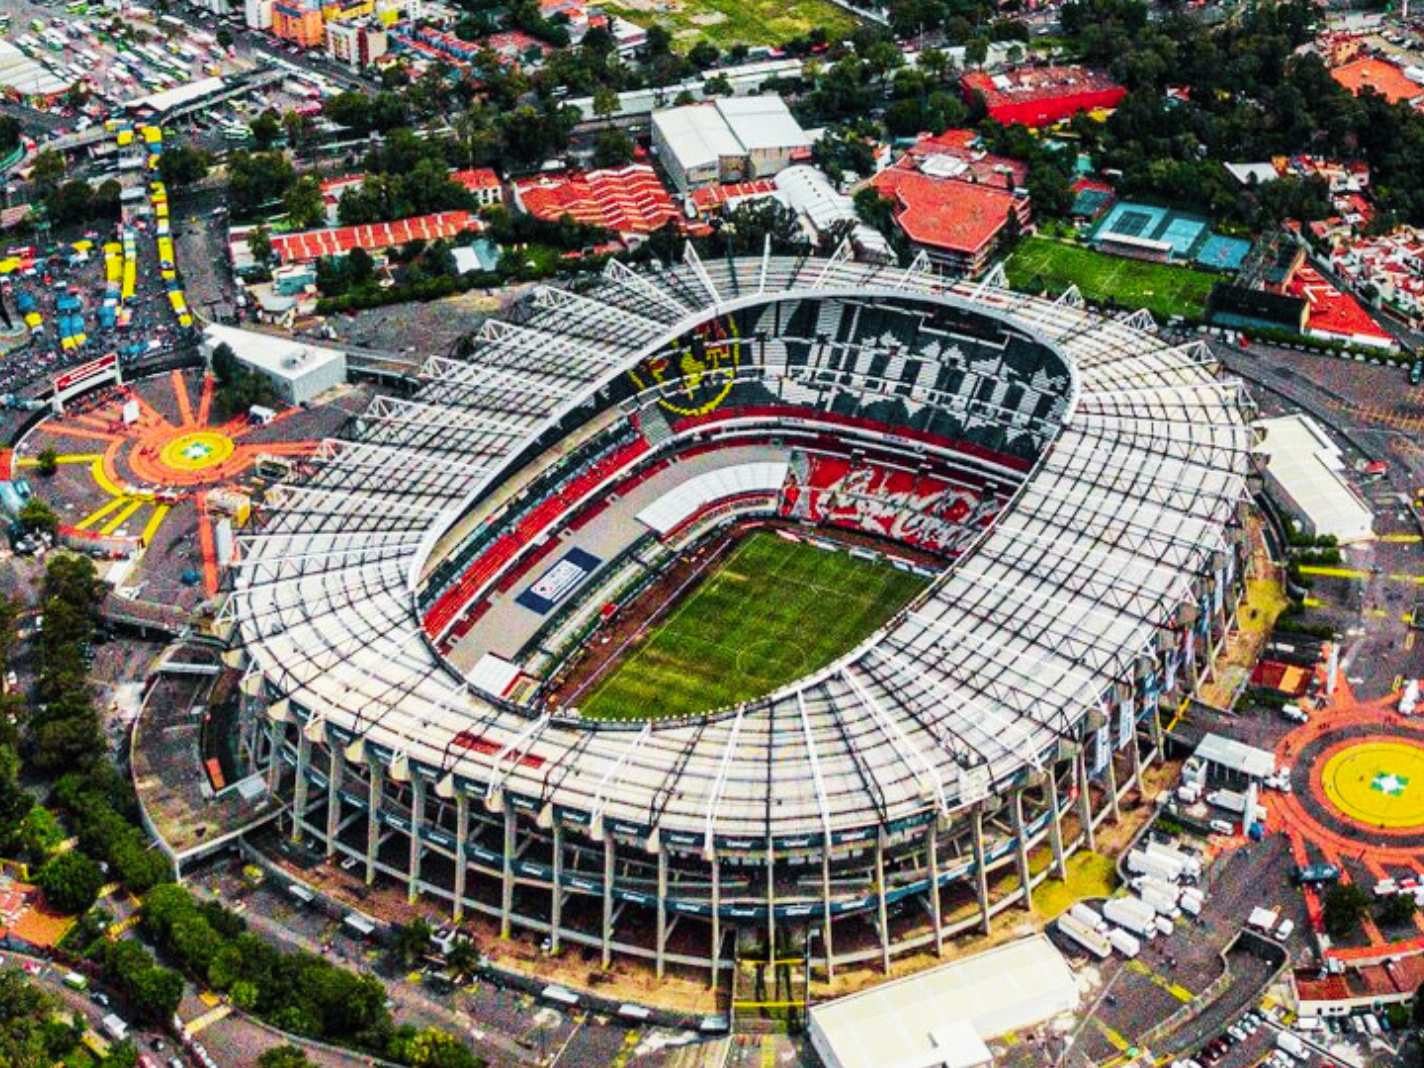 Estadio Azteca Will Hold the Opening Match of 2026 World Cup: Capacity, Location, Photos & More